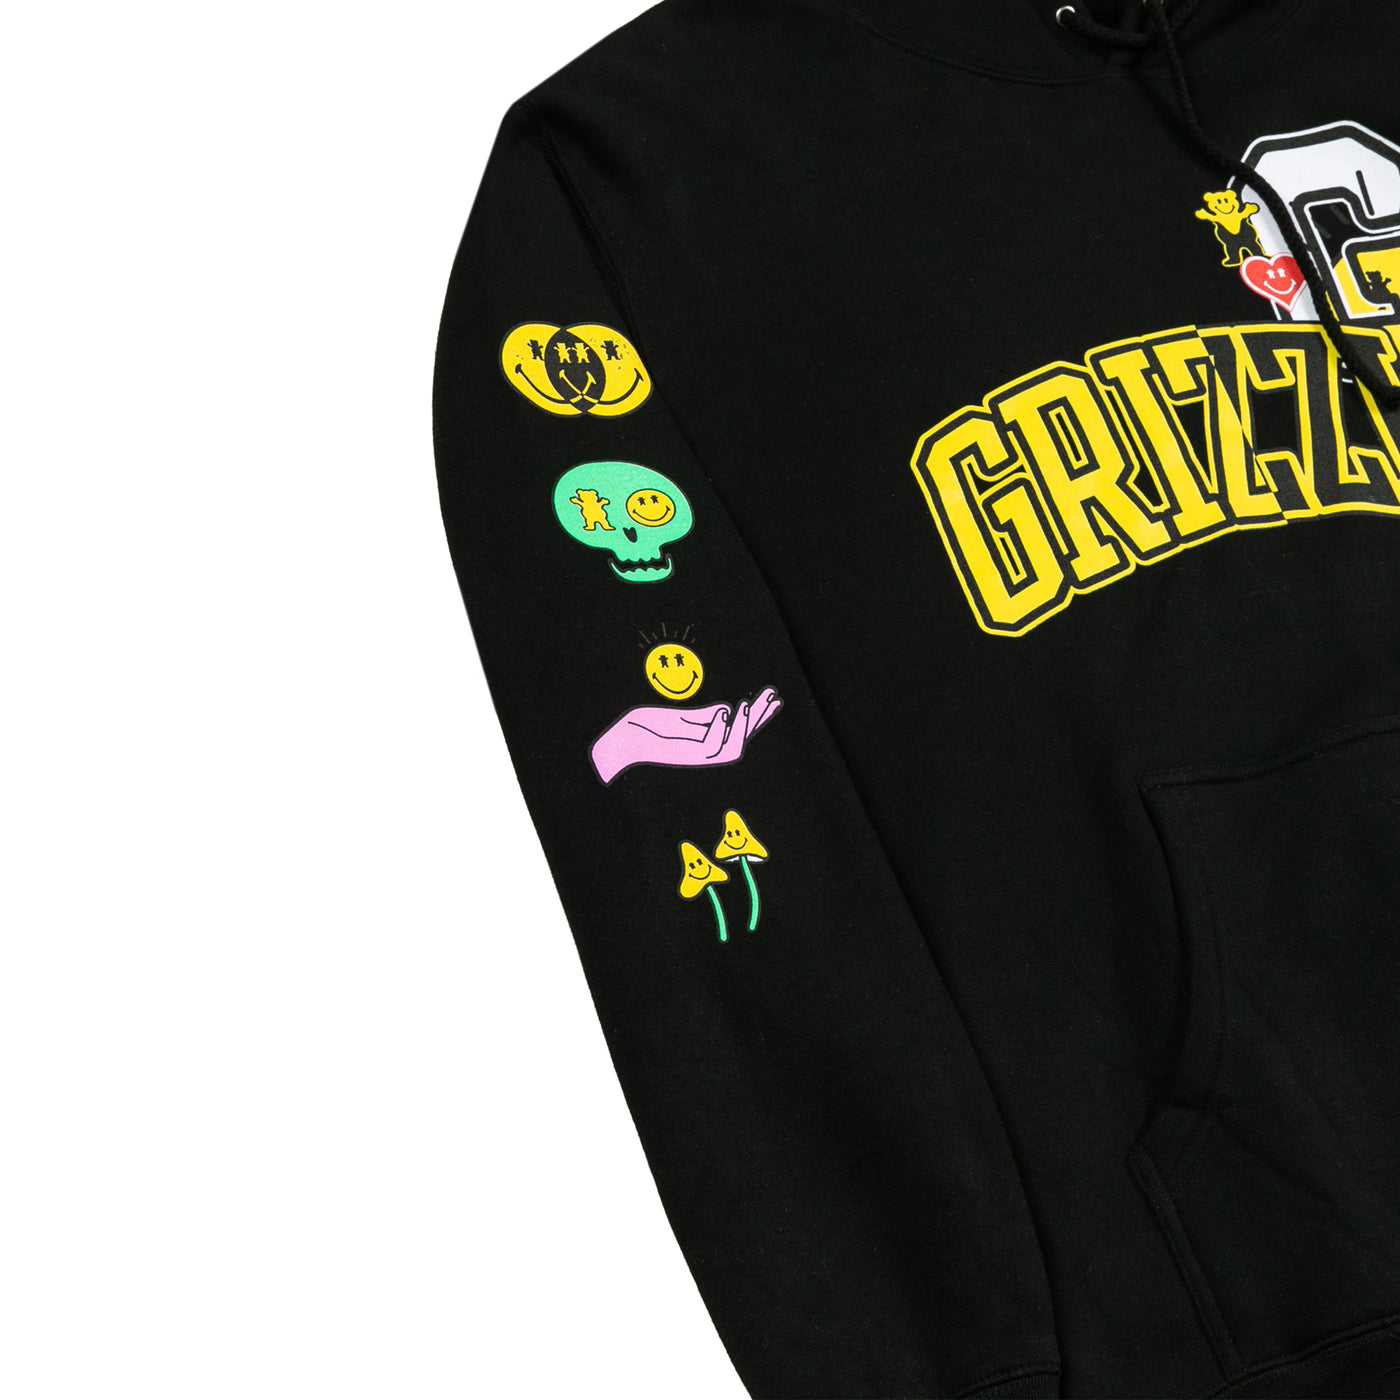 SMILEYWORLD Grizzly x Smiley World Pullover Hoody - Black